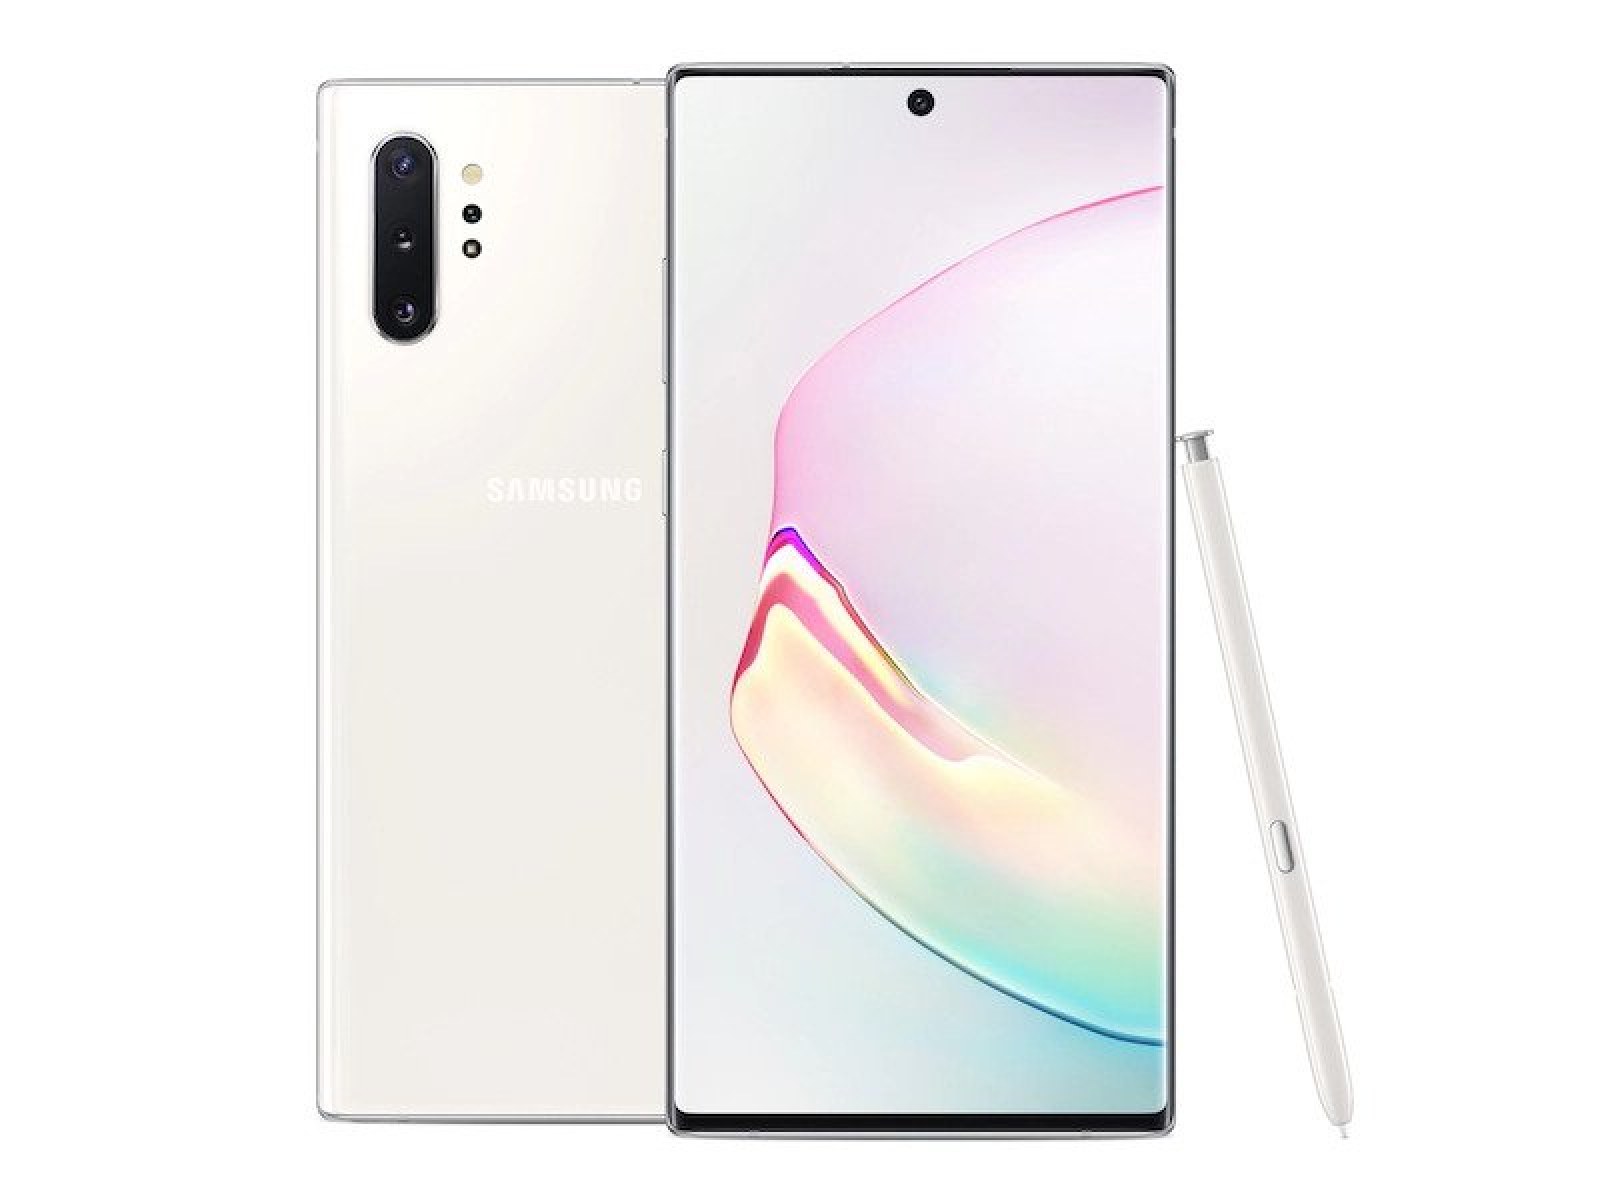 Gaaxy Note 10 Plus Samsung Galaxy Note 10 Plus Specs: Waterproof, SD Card, Colors, Camera &  More